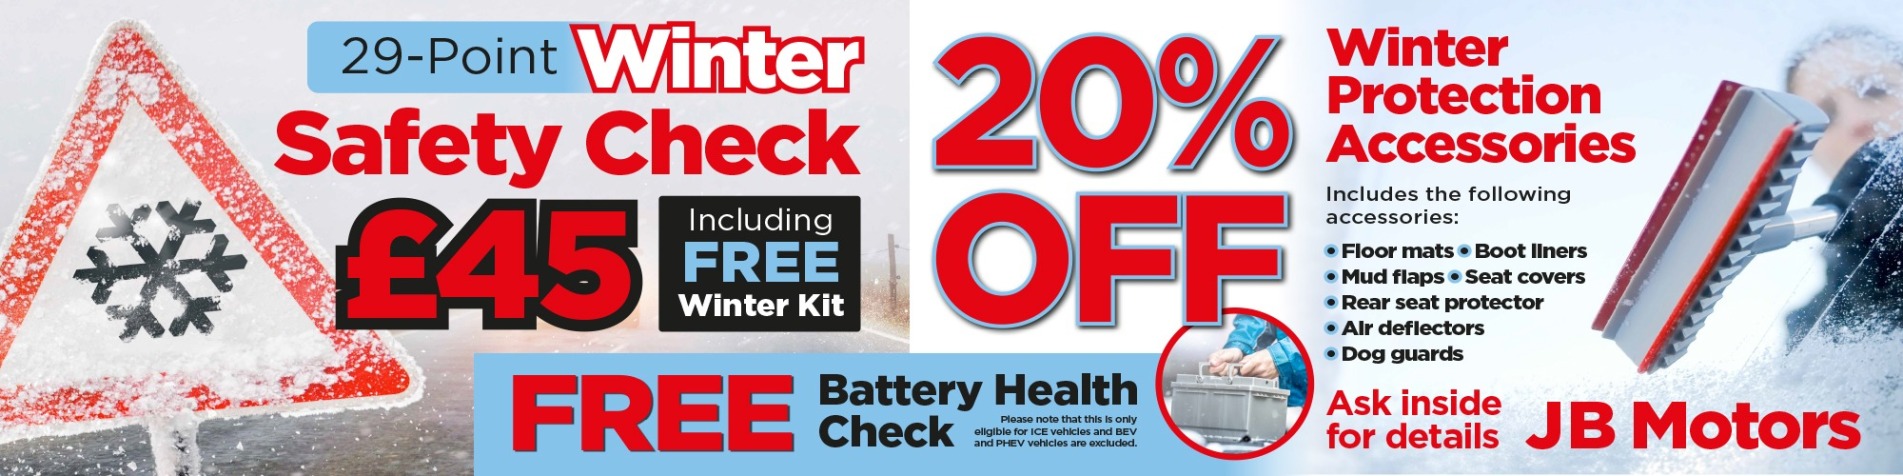 Winter Safety Check Banner